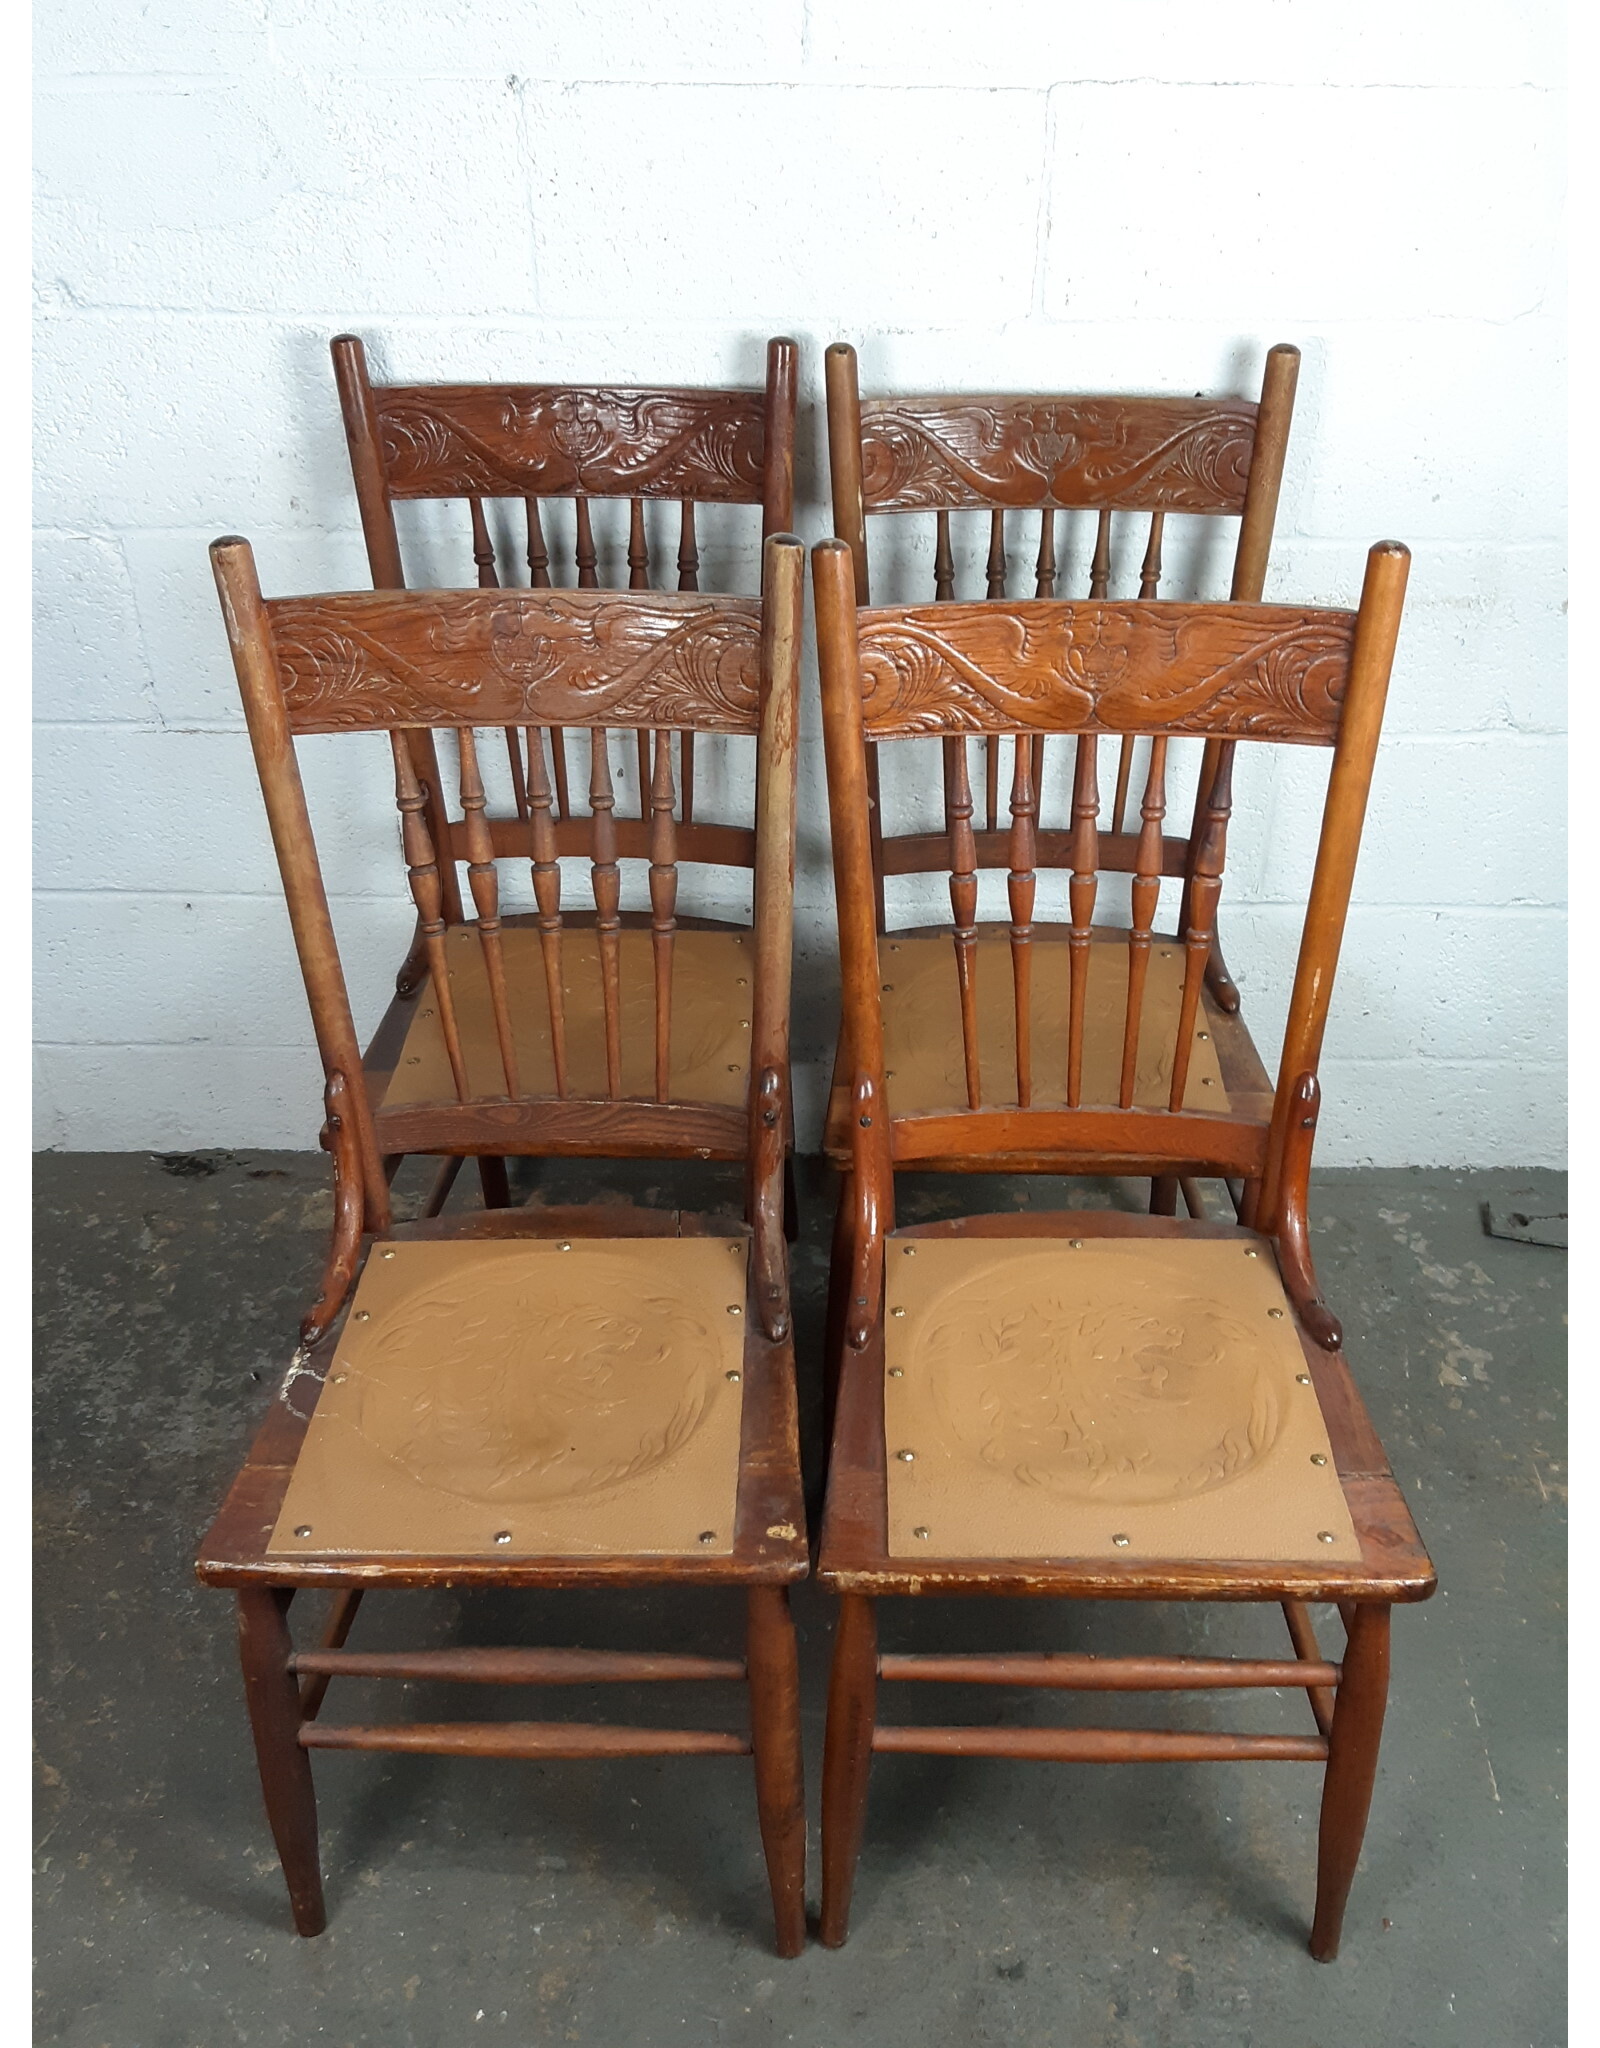 Vintage Oak Dining Chair With Leather Seat & Hand Carved Design